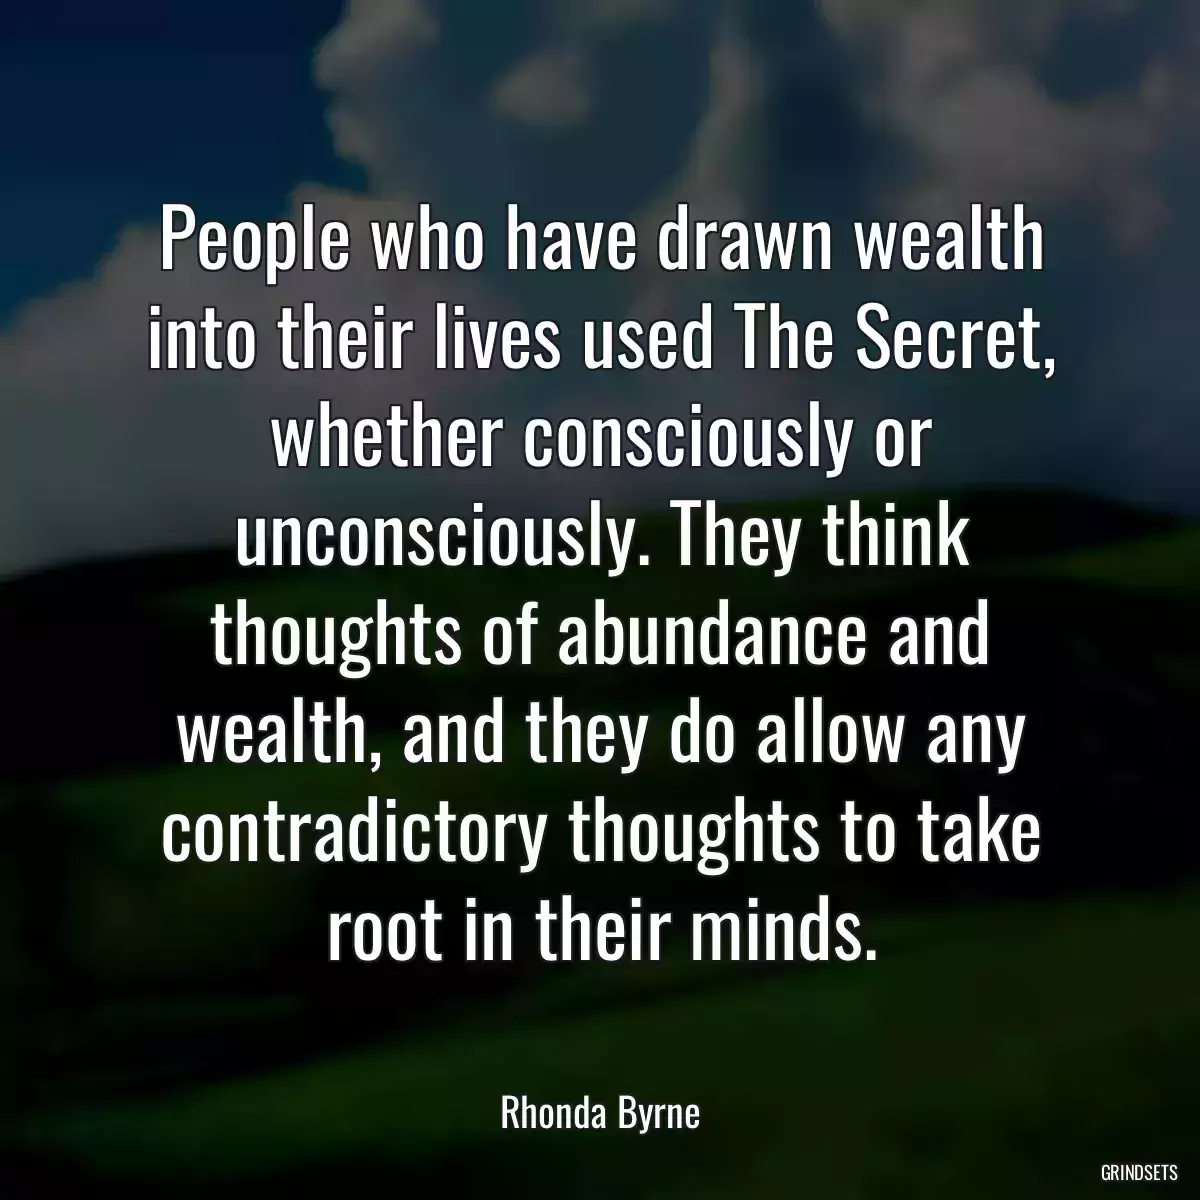 People who have drawn wealth into their lives used The Secret, whether consciously or unconsciously. They think thoughts of abundance and wealth, and they do allow any contradictory thoughts to take root in their minds.